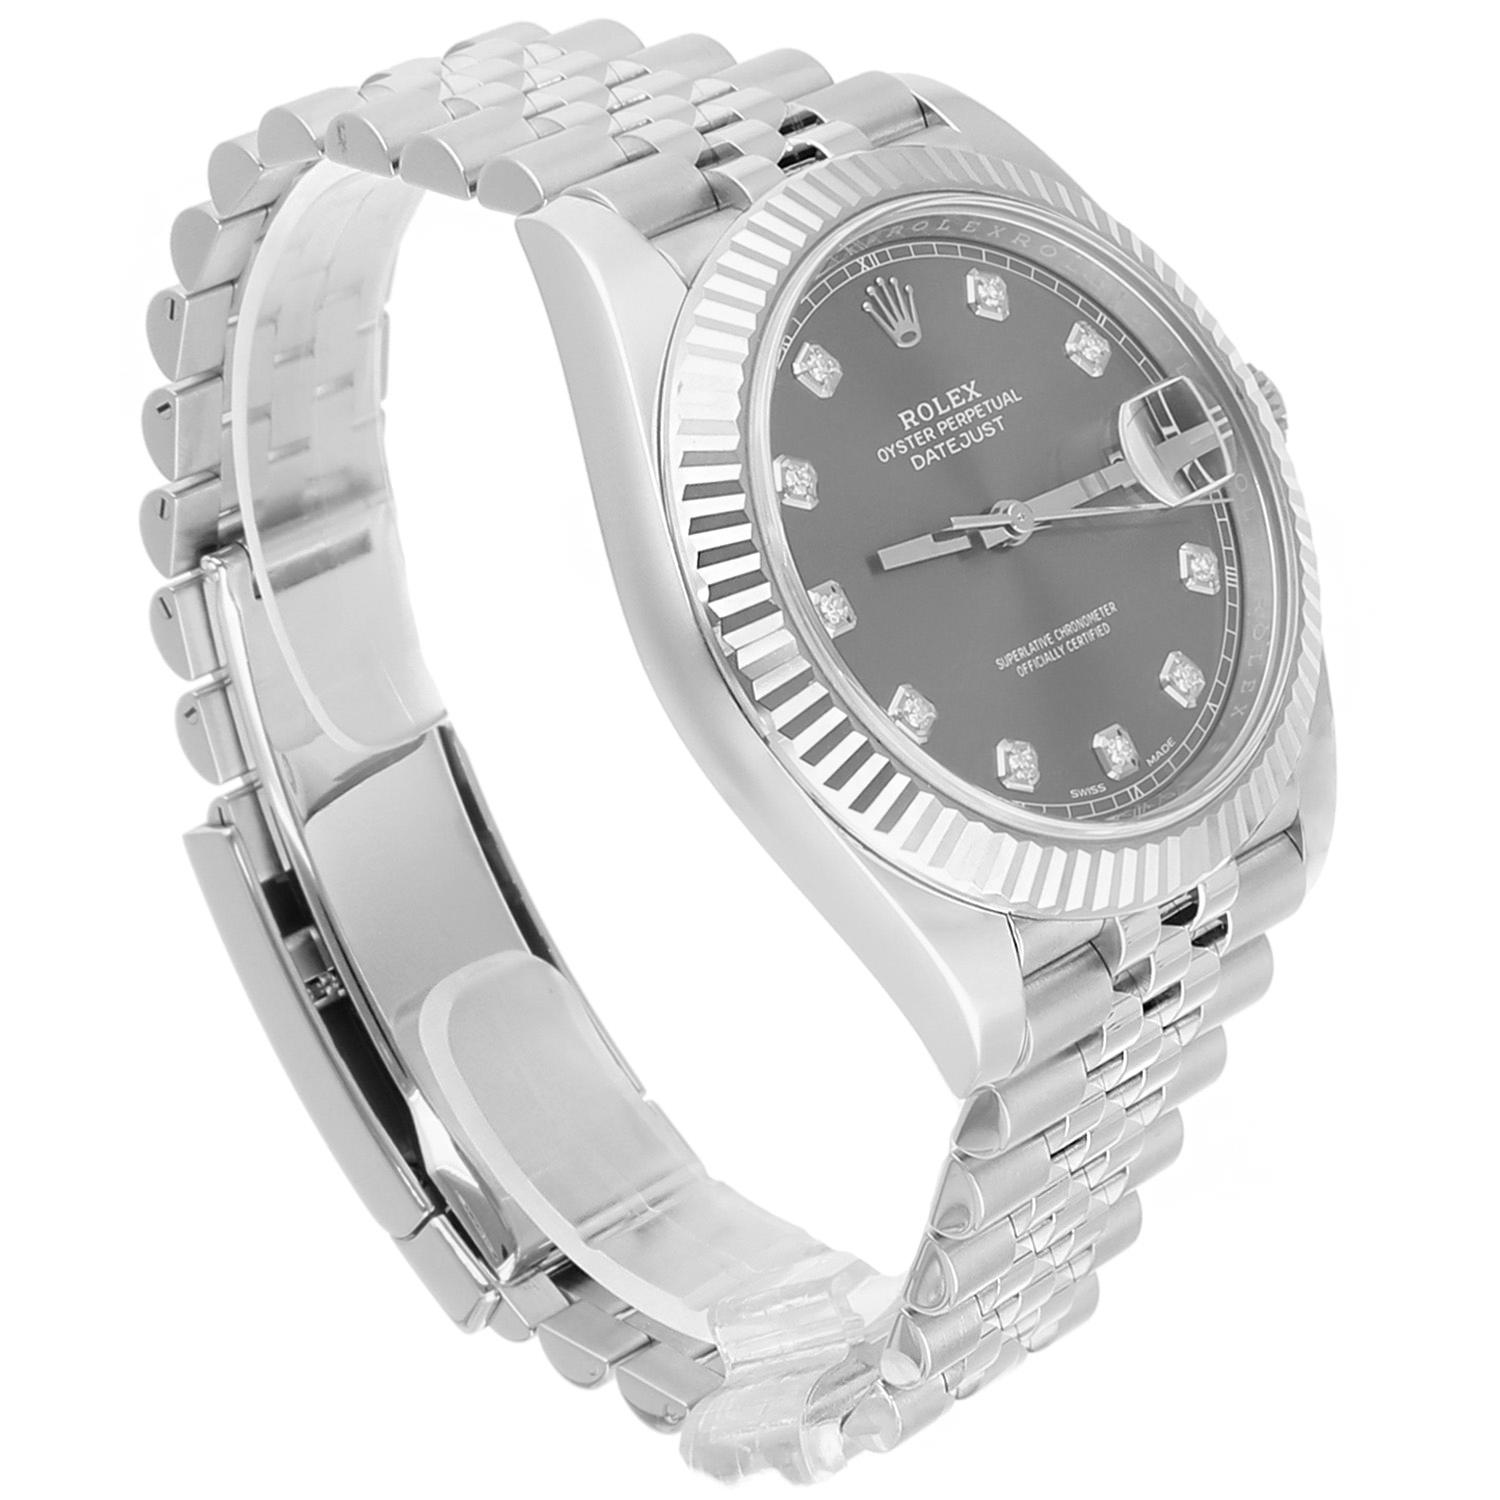 Rolex Datejust 41mm Jubilee Stainless Steel Watch Rhodium Diamond Dial 126334 For Sale 5